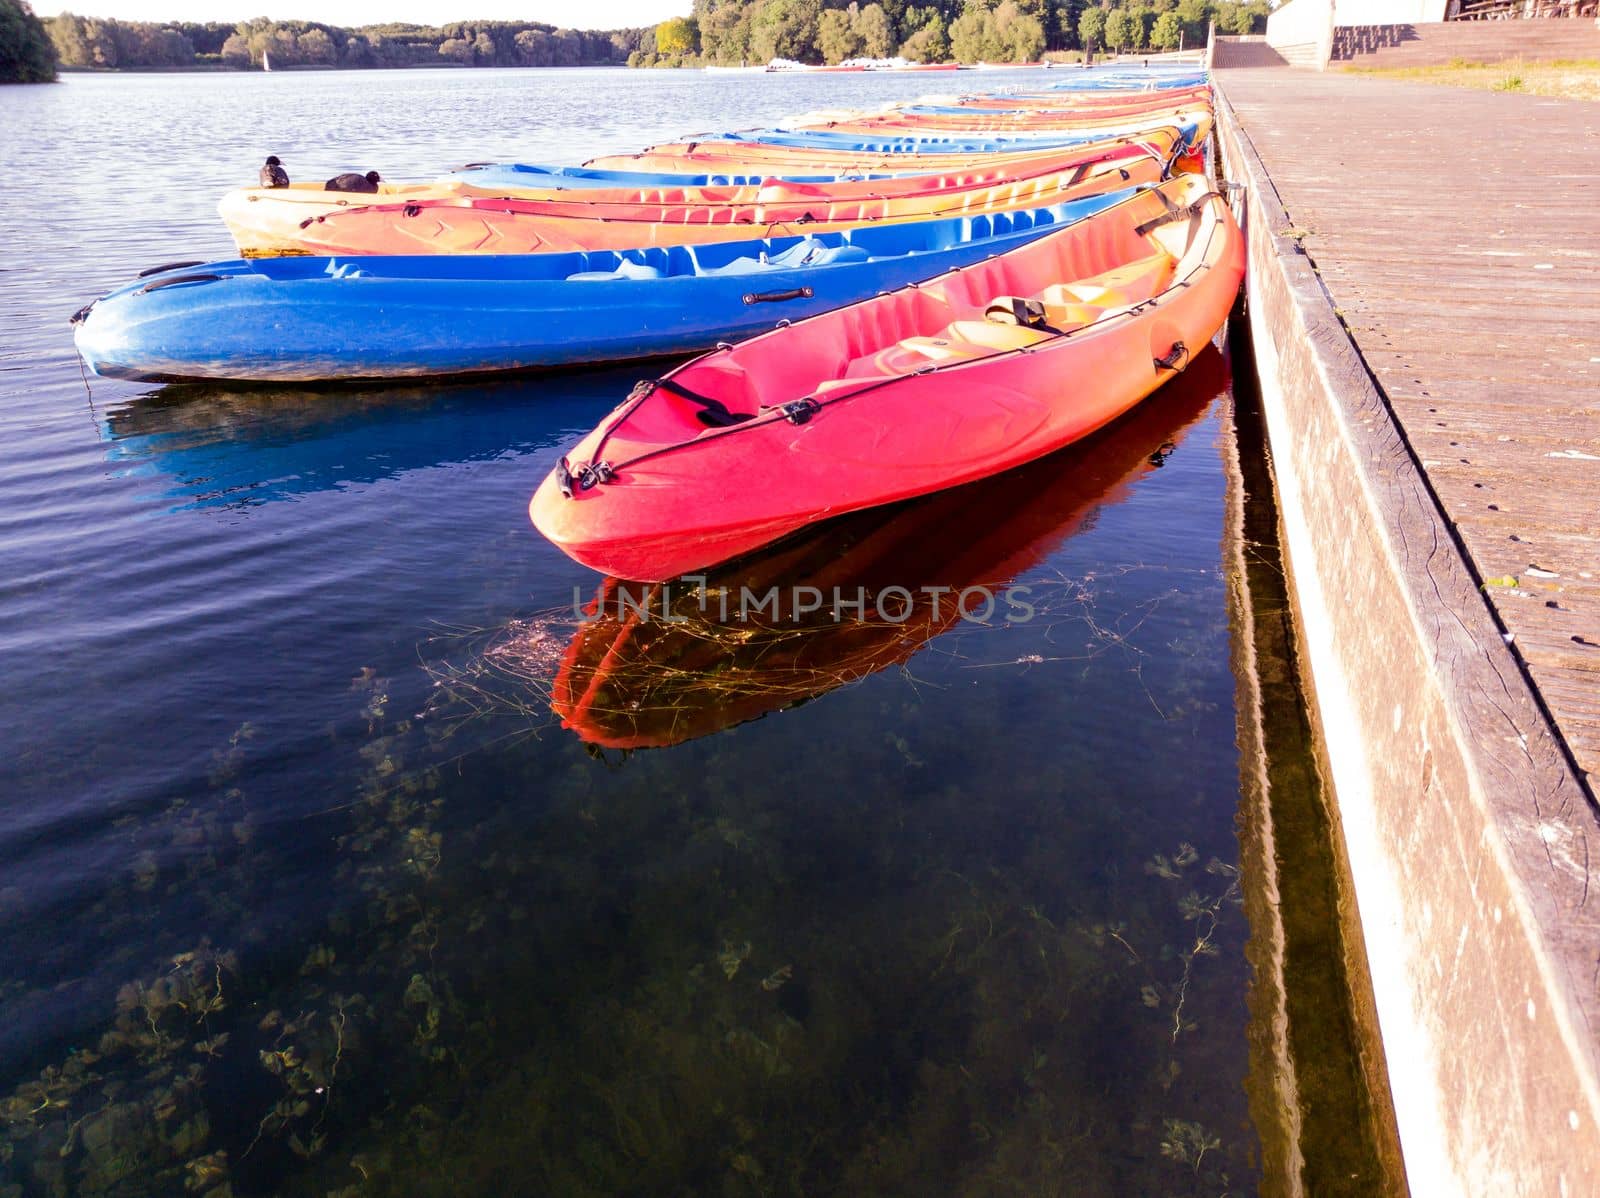 a group of kayaks in red and blue colors floating at a lake with their reflections and waiting for people on a sunny day